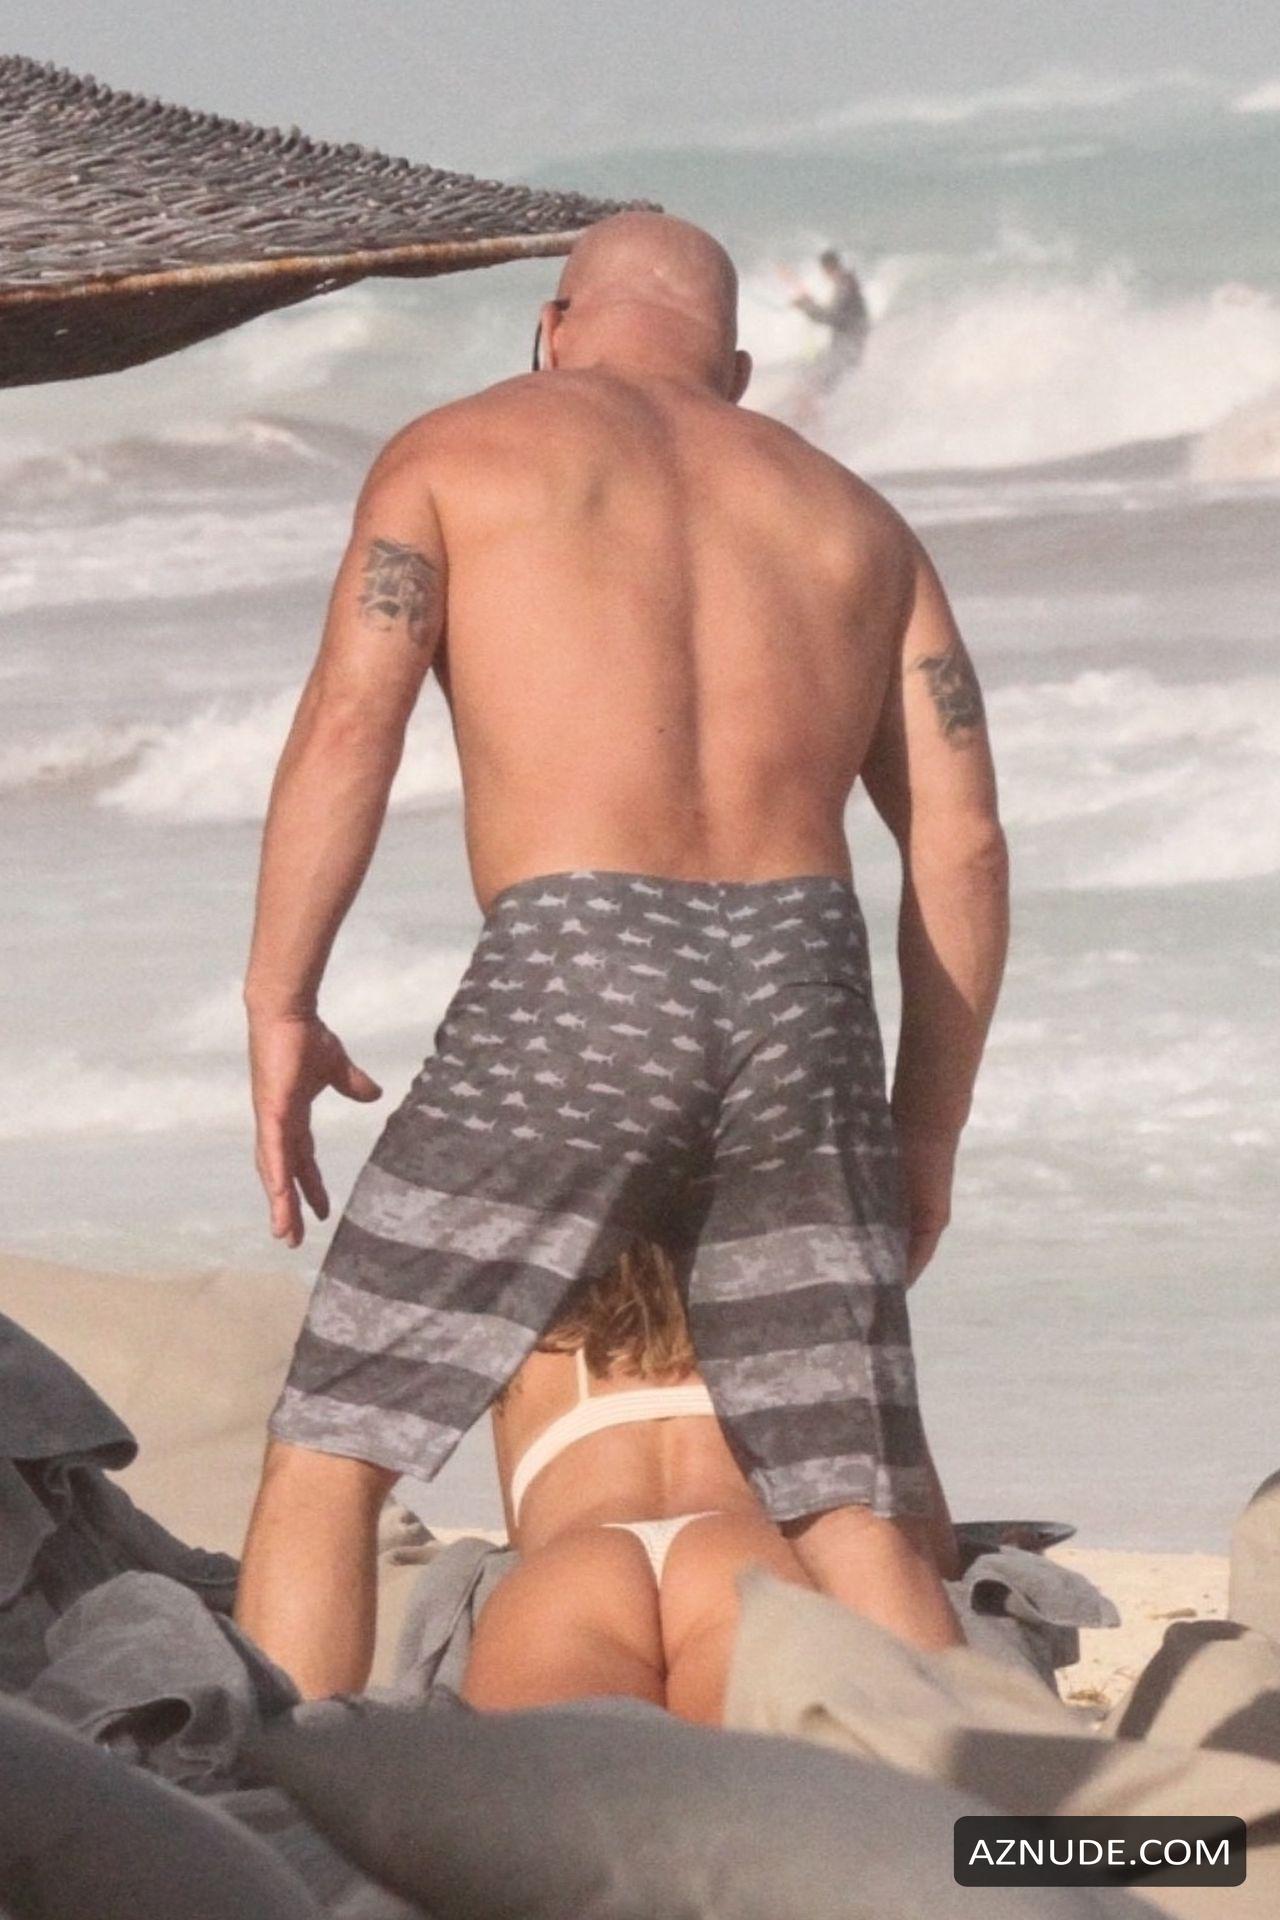 Ufc Fighter Tito Ortiz Was Seen Having A Good Time At The Beach With His Girlfriend Aznude